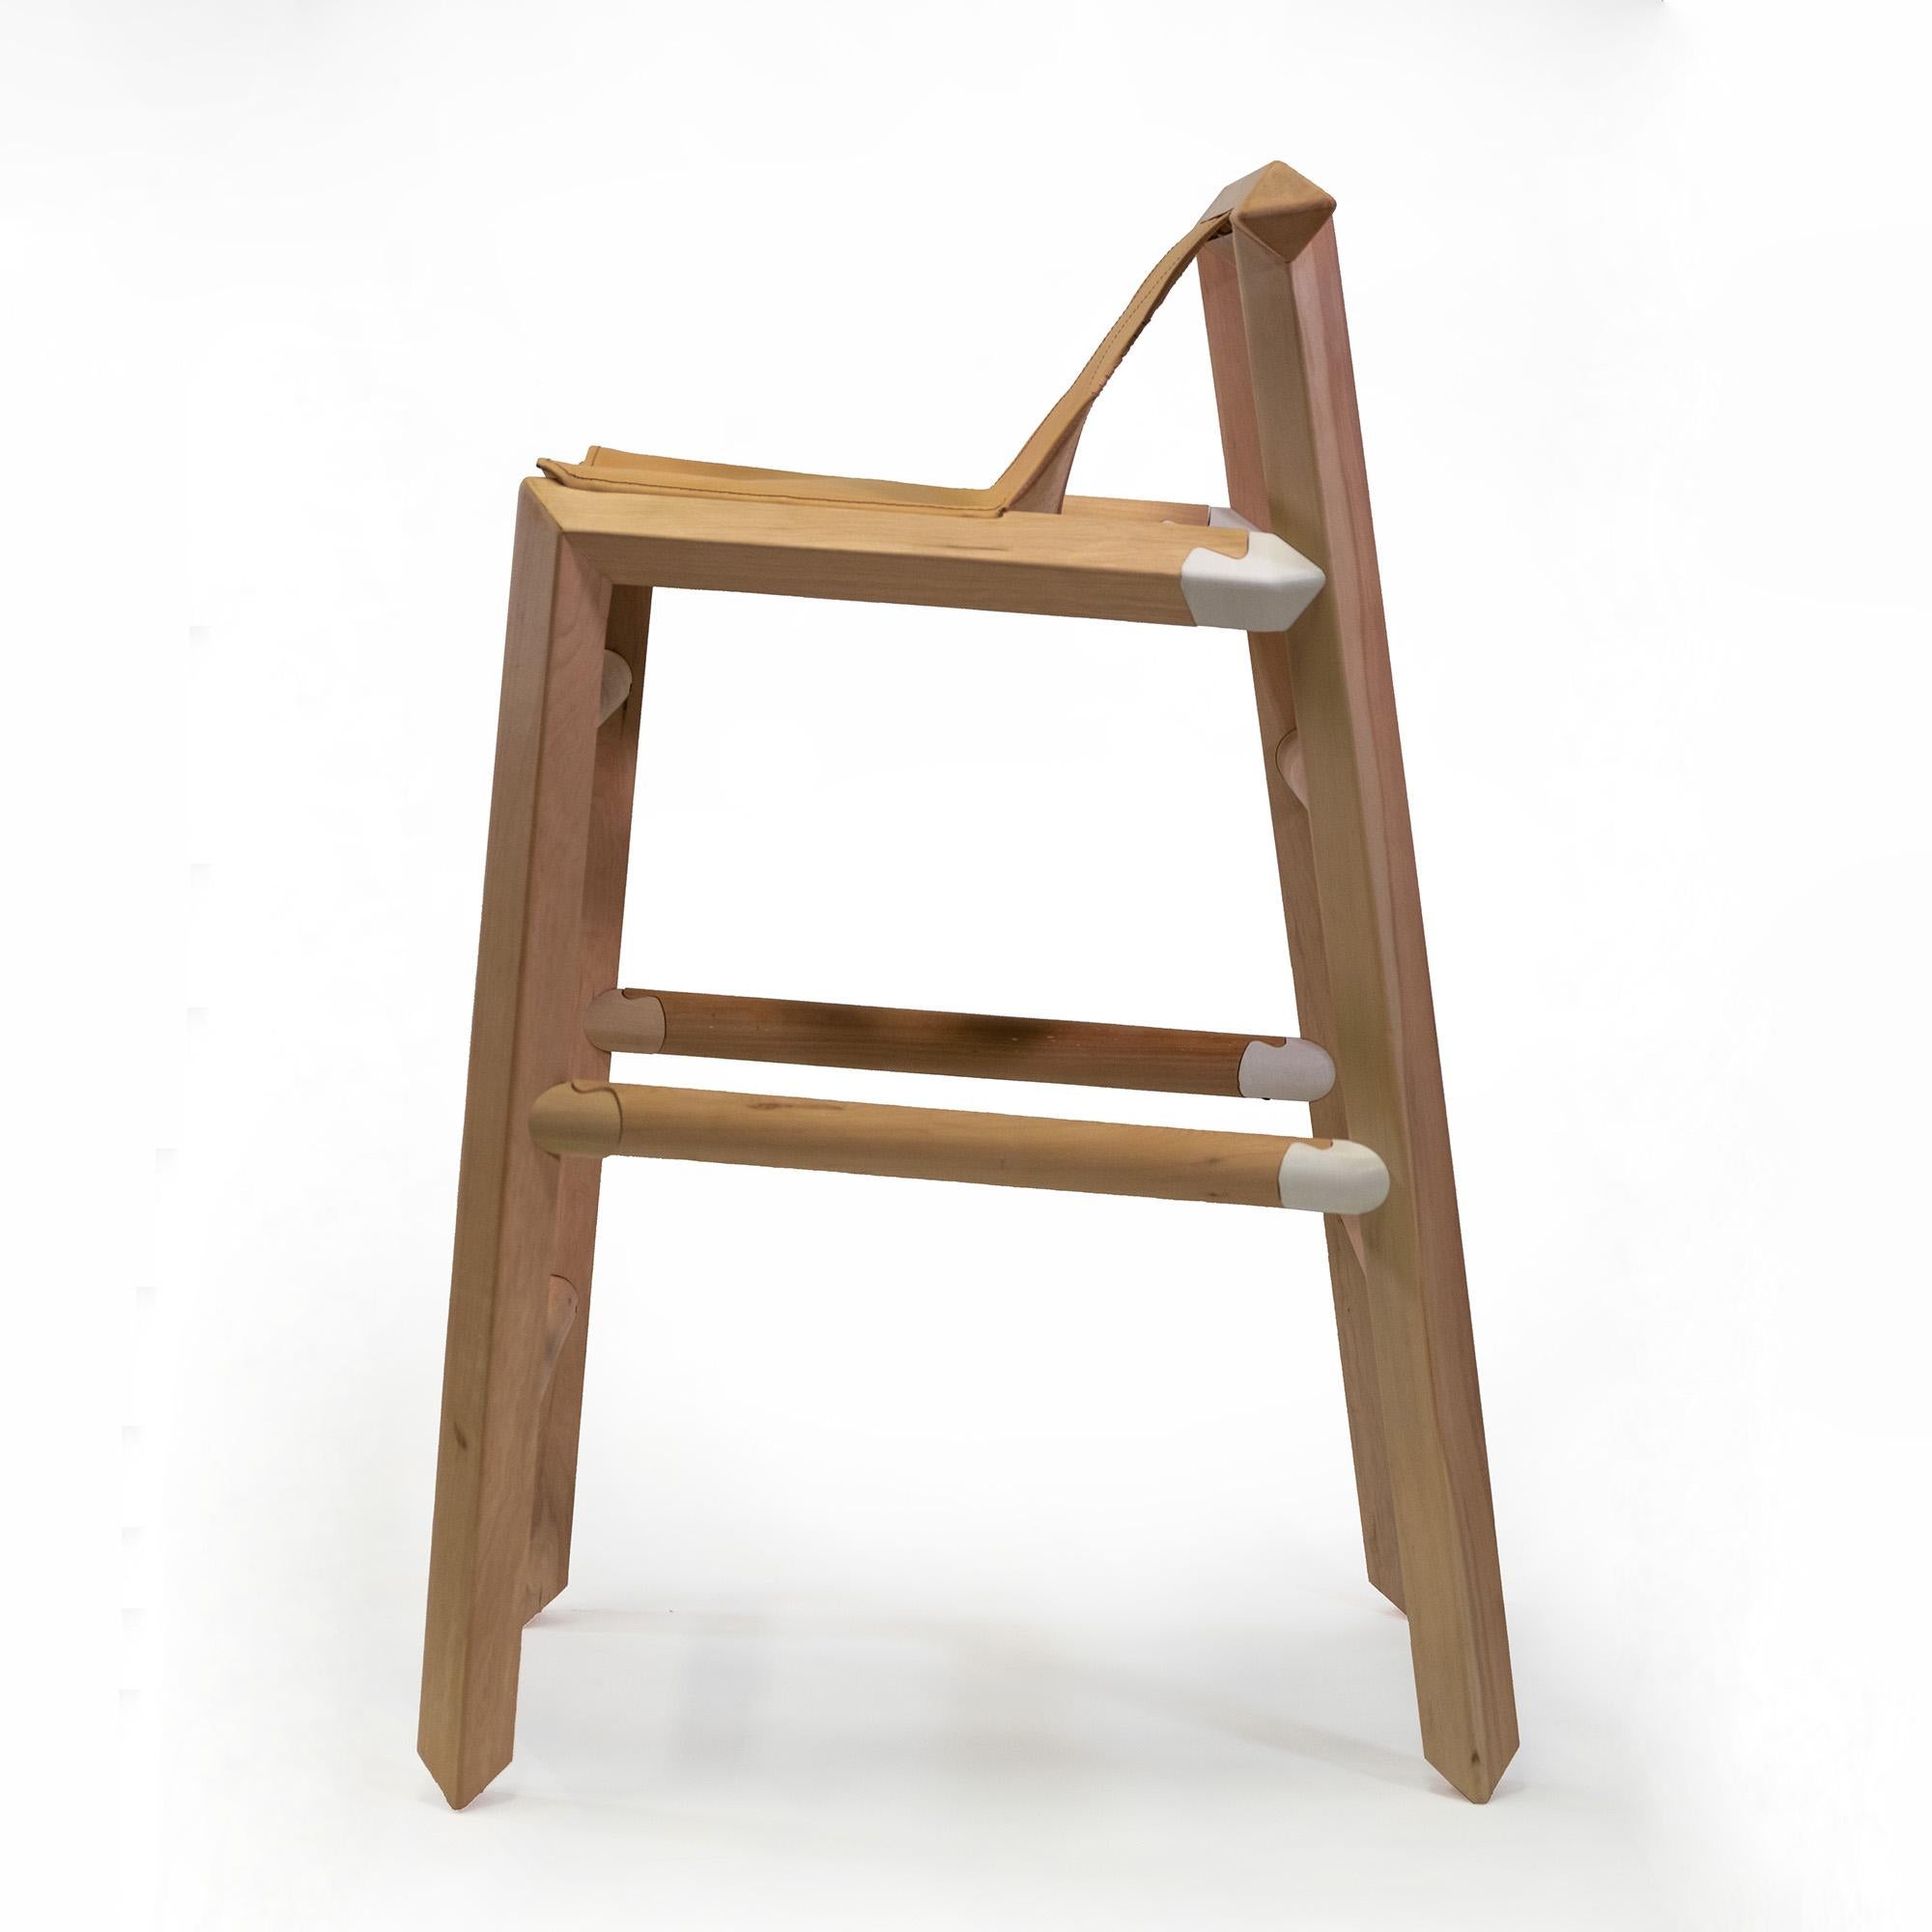 The barstool 1903 was launched at the ICFF - Wanted design fair in 2019, during the New York design week. Each one of those barstools are  made by his creator § team at the espina corona workshop under SLOW MADE standards and with ecological